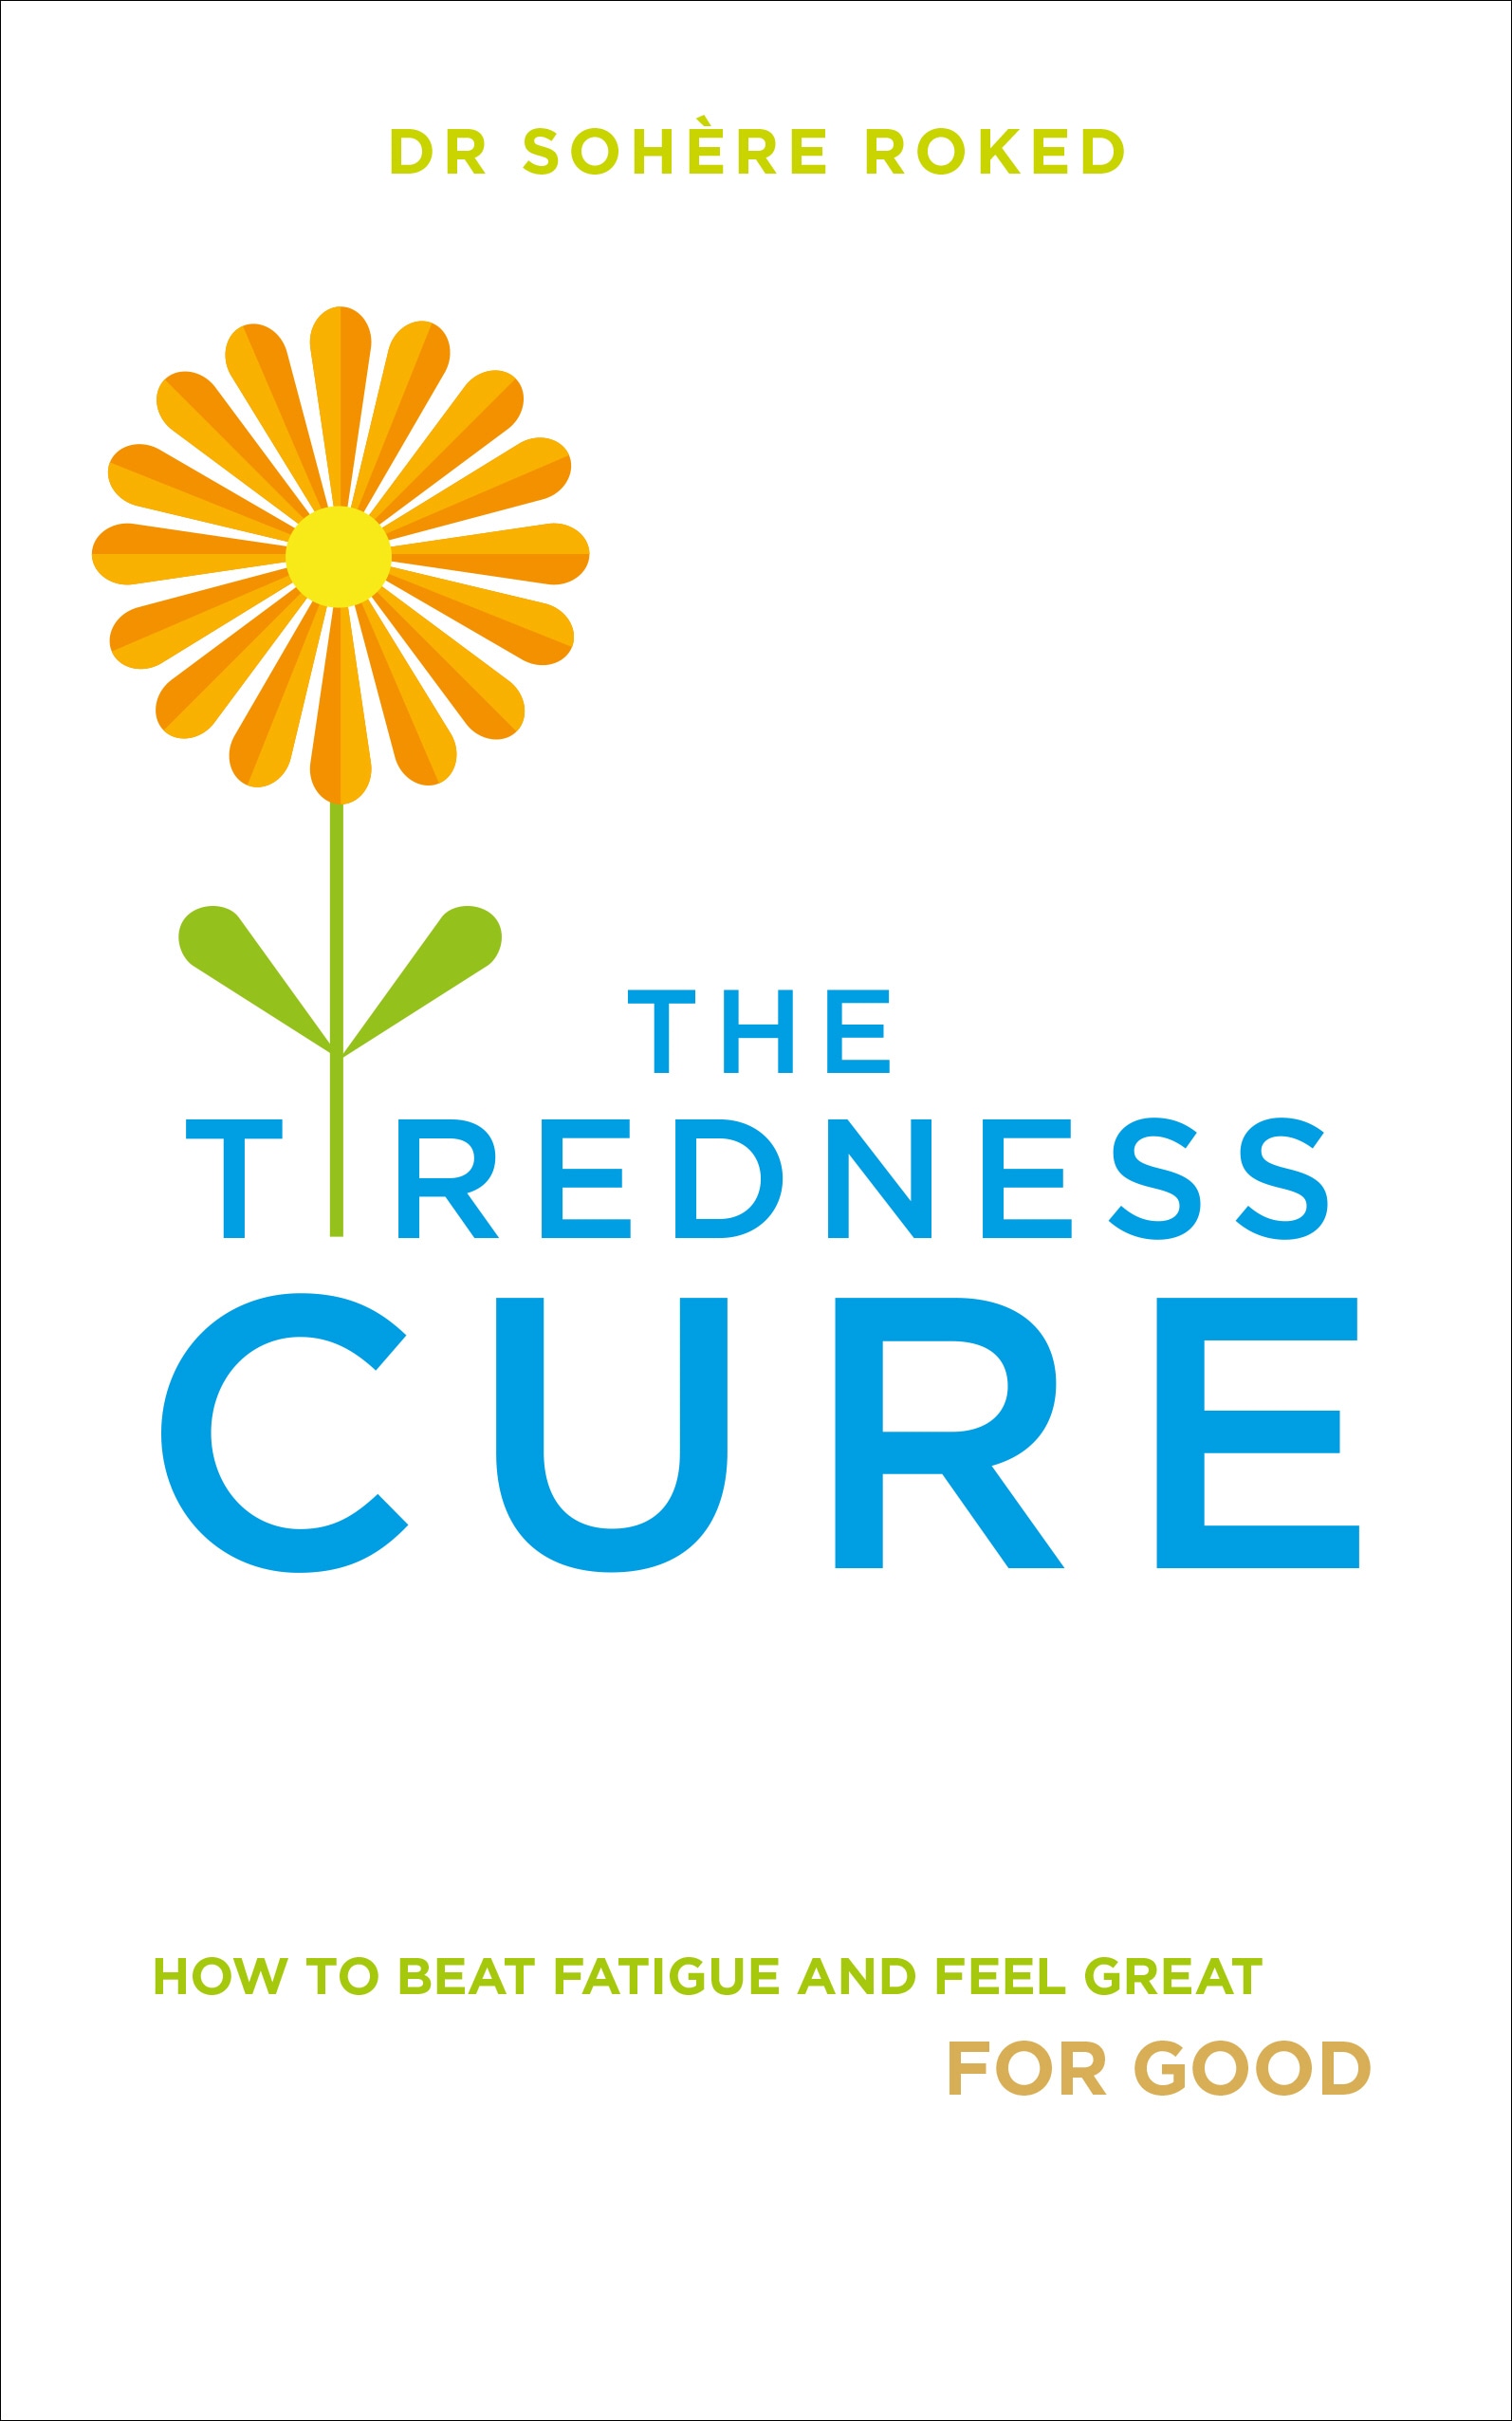 Book “The Tiredness Cure” by Dr. Sohere Roked — September 4, 2014